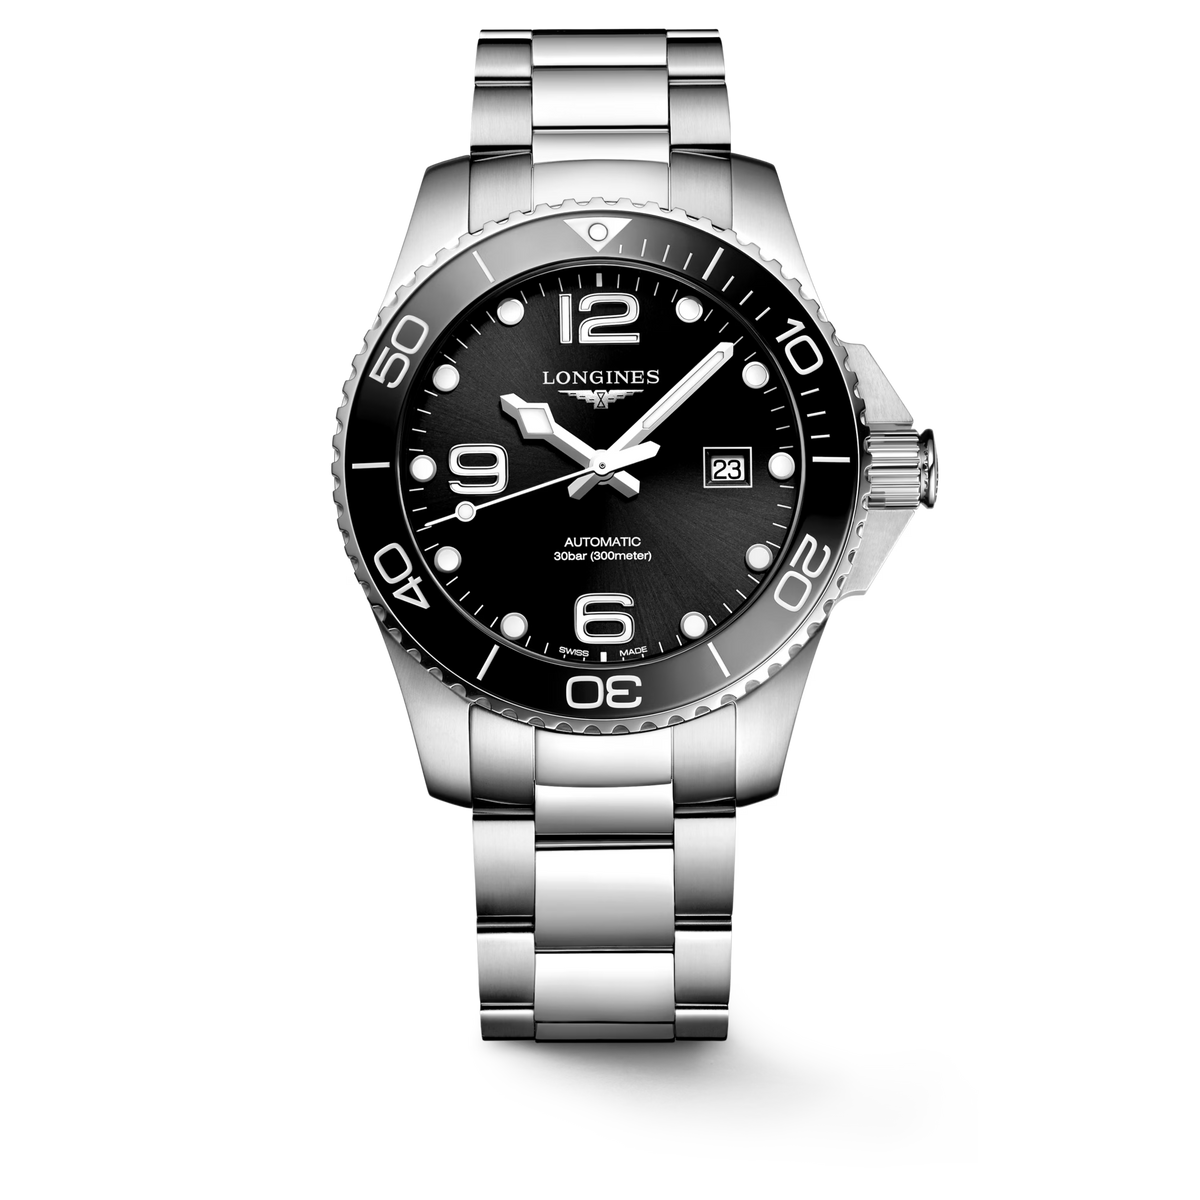 LONGINES HYDROCONQUEST CERAMIC 43MM AUTOMATIC DIVING WATCH